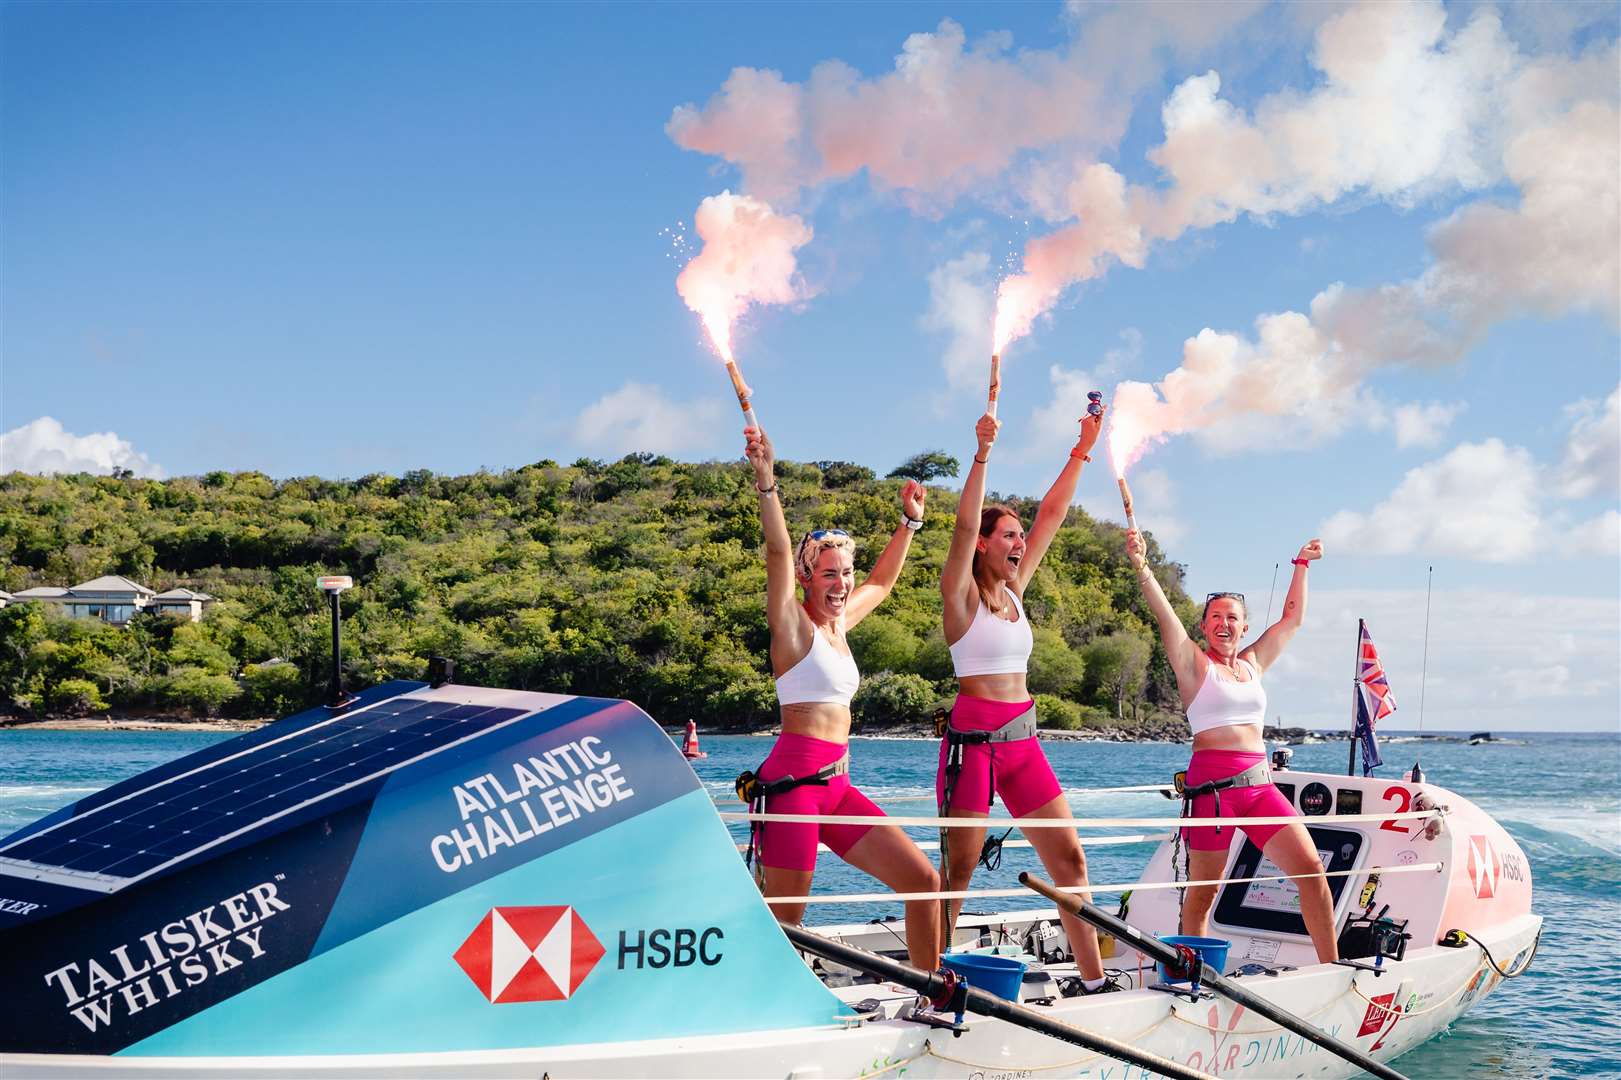 'ExtraOARdinary', a team of three women, set a new World Record this year for the Fastest Women’s Trio to row the Atlantic Ocean. Picture: Penny Bird